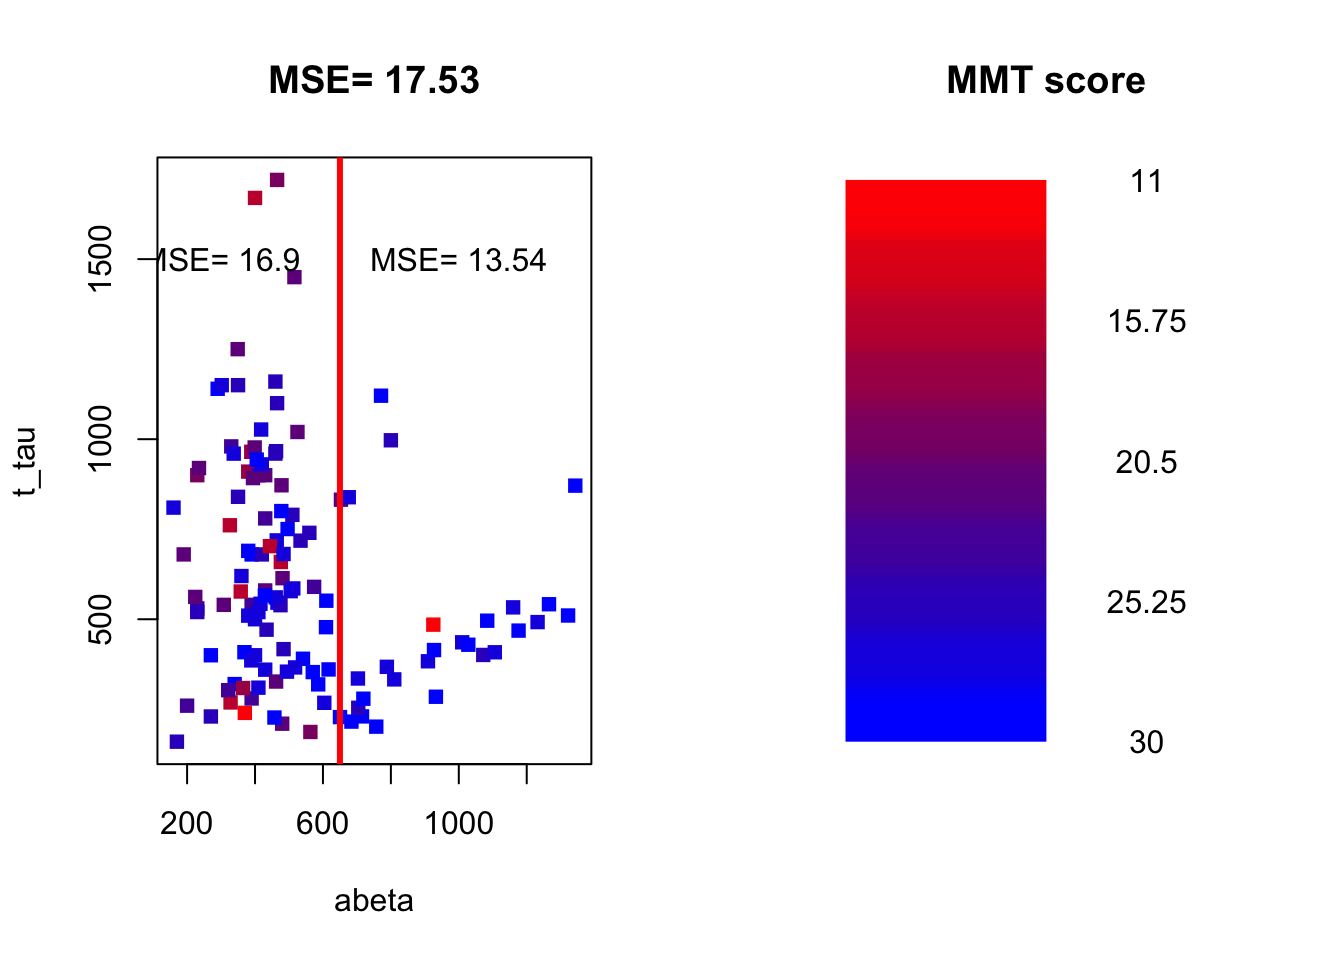 The example of two variables measured on a number of samples. The MMT score is shown as a gradient from red (lowest score) to blue (highest score)